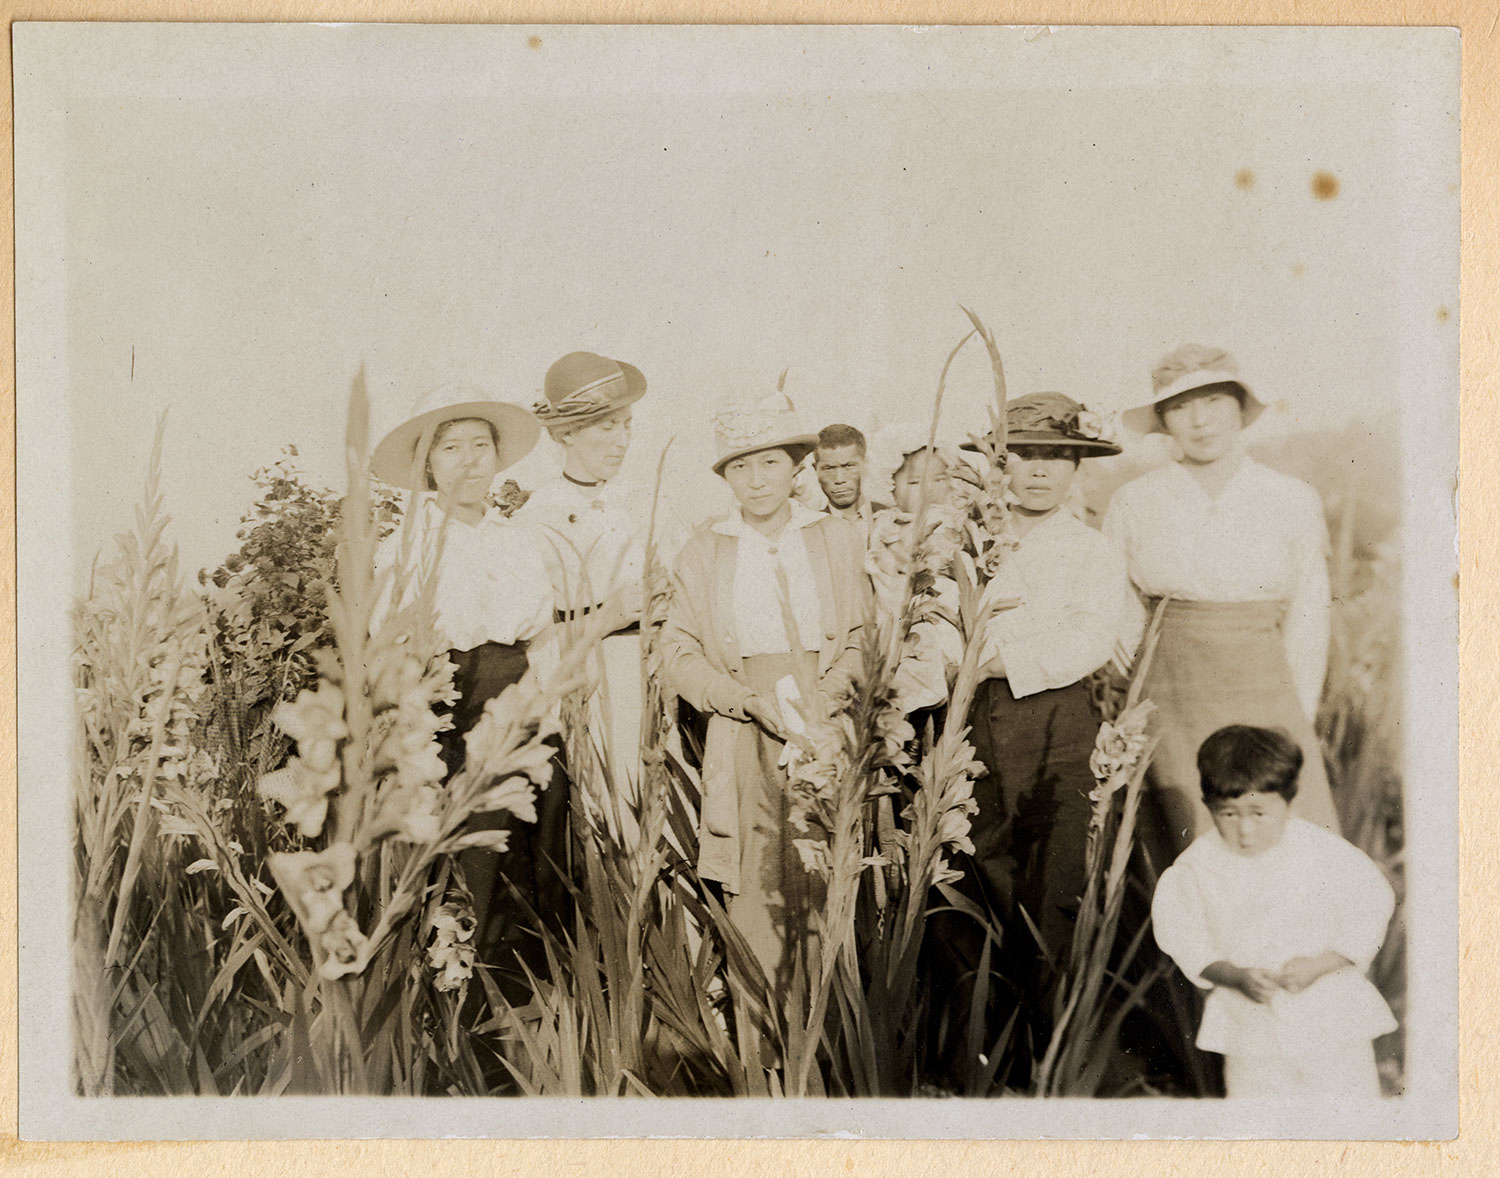 Jessie Howie with a group in the garden